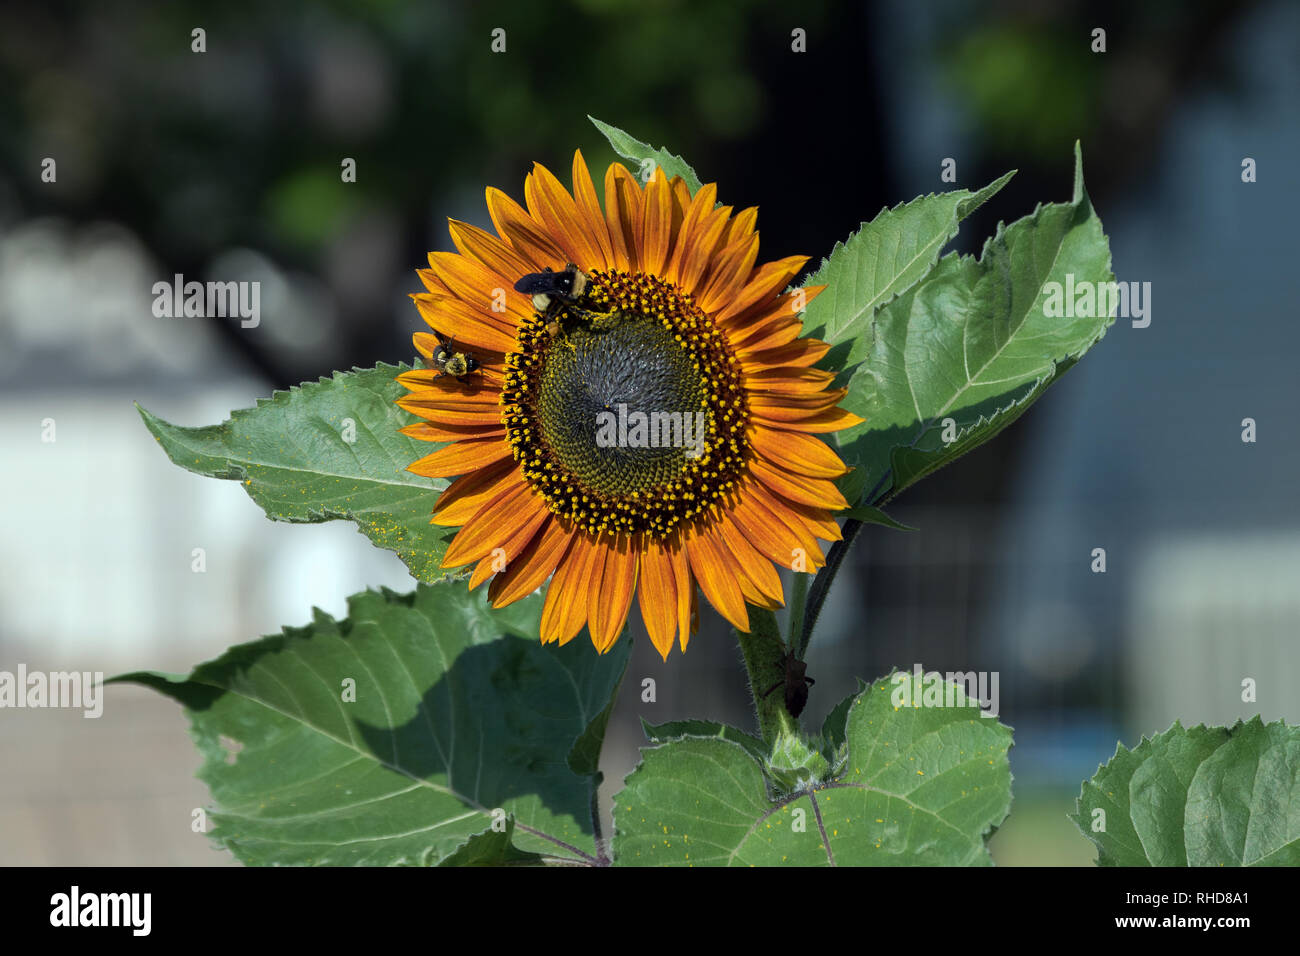 A couple of bumble bees work at gathering pollen from an orange sunflower with a defocused background. Stock Photo